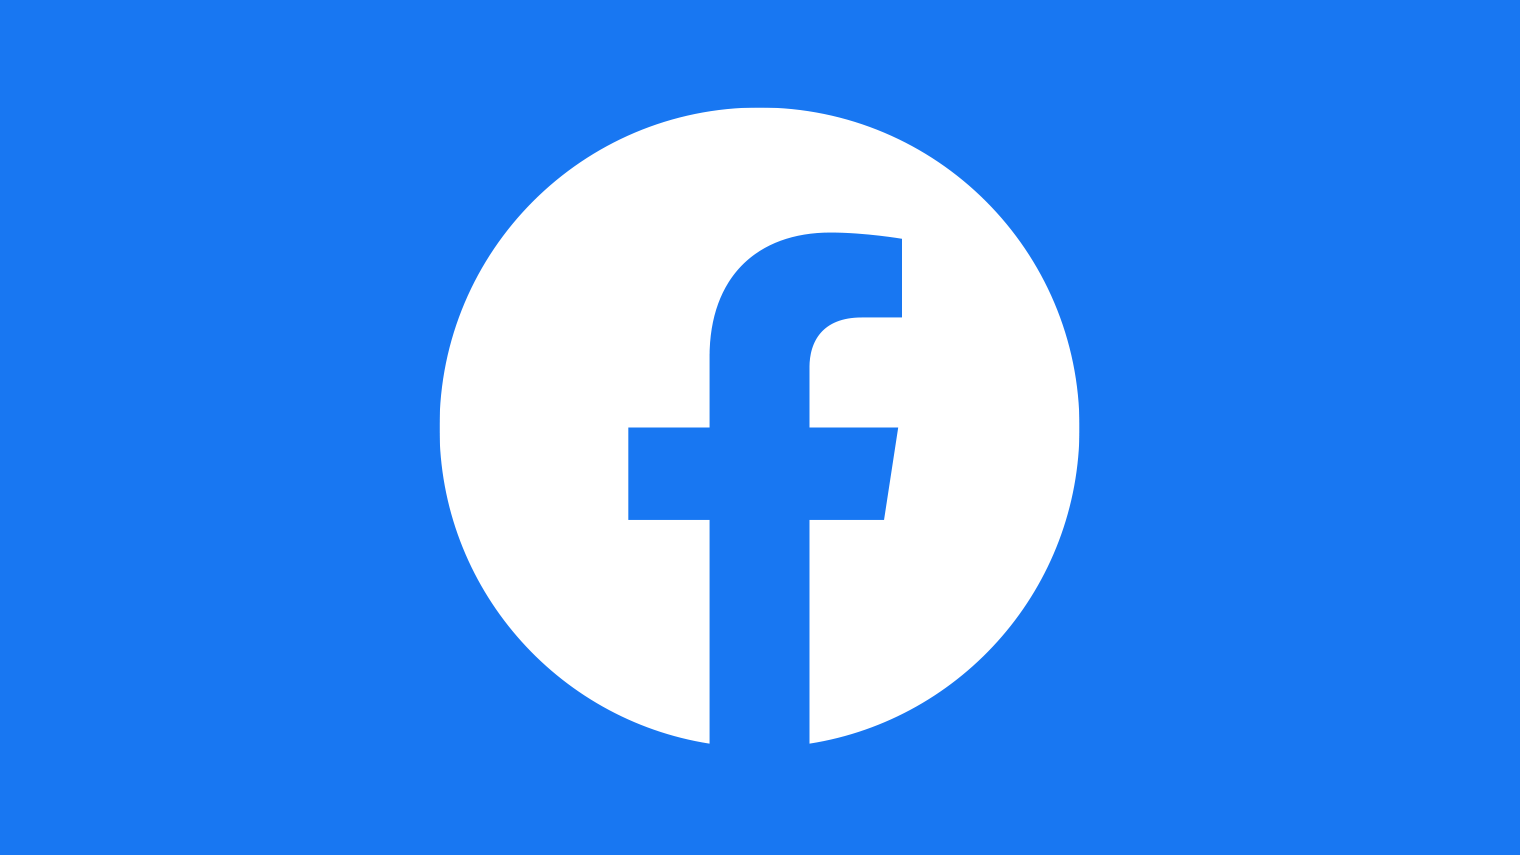 The white Facebook "f" logo on a blue background